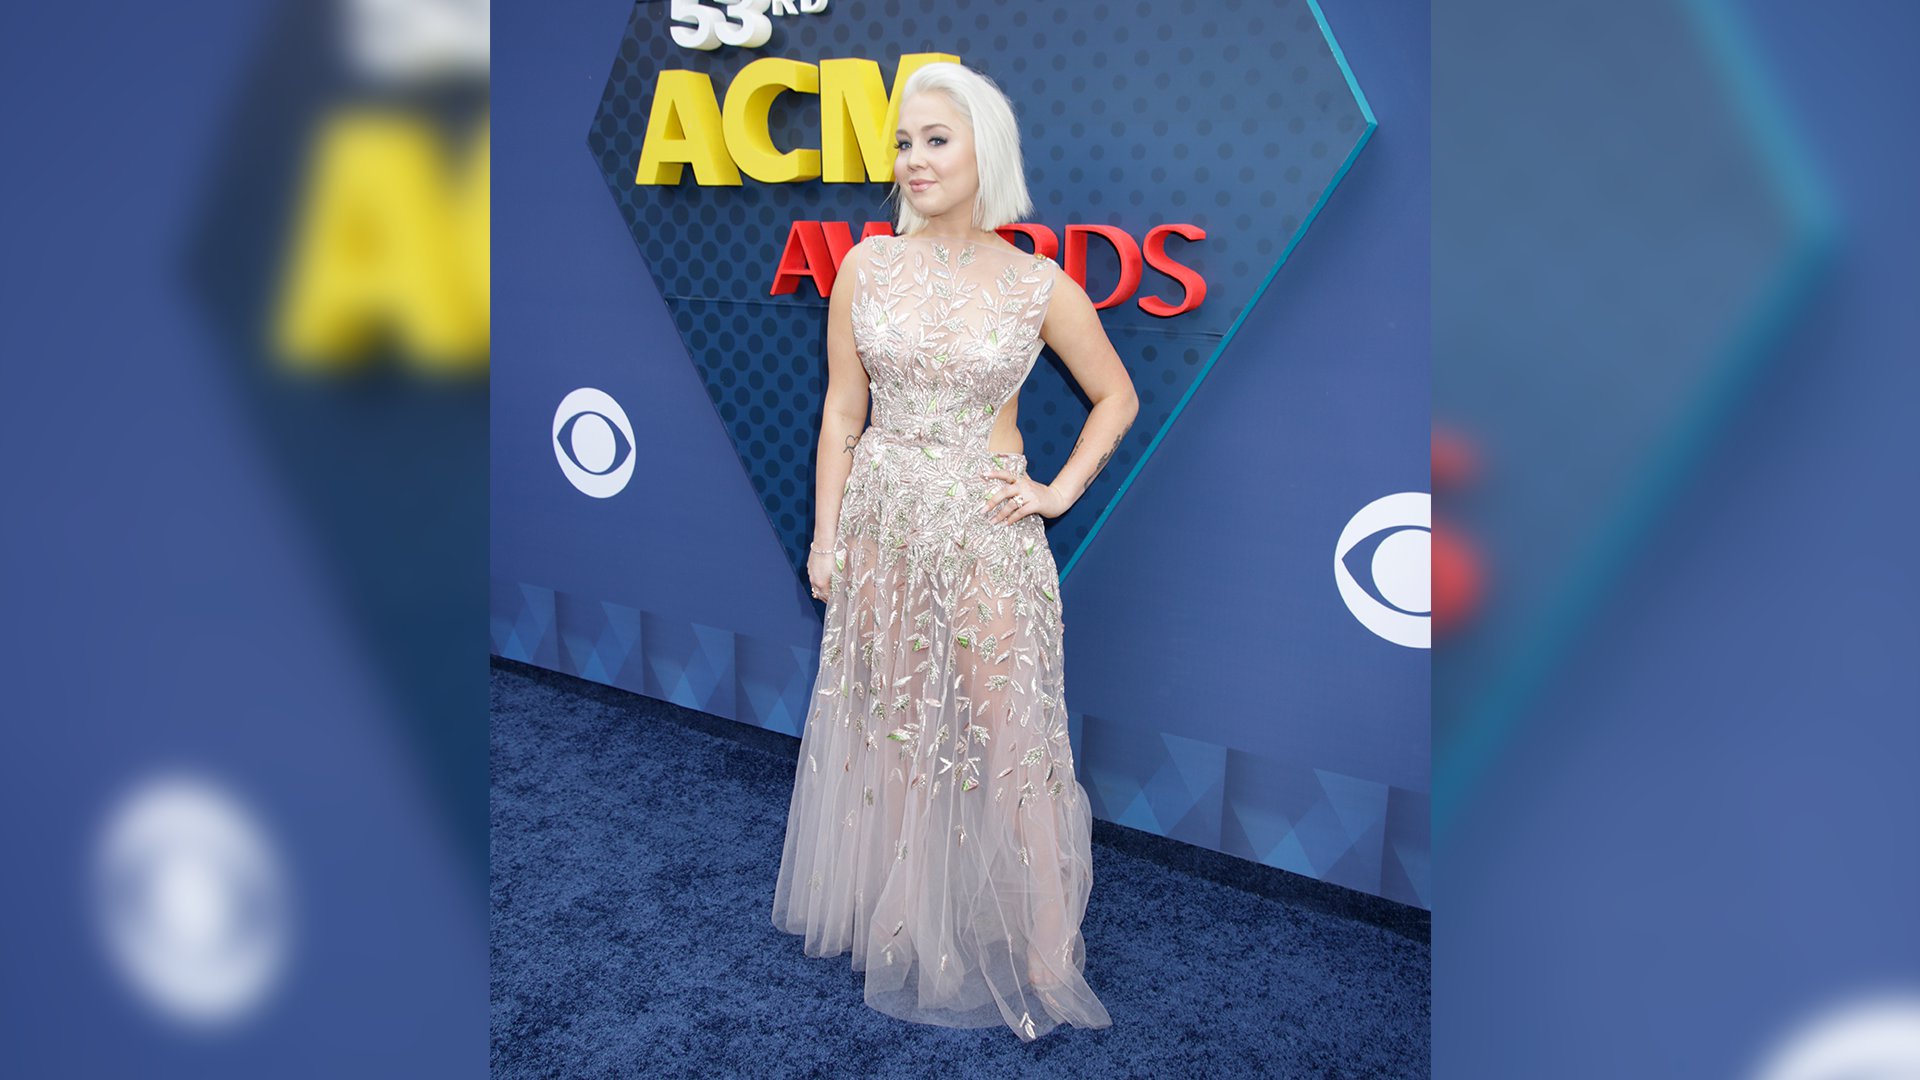 RaeLynn pairs her blunt blond bob with a floor-length, peek-a-boo evening gown.